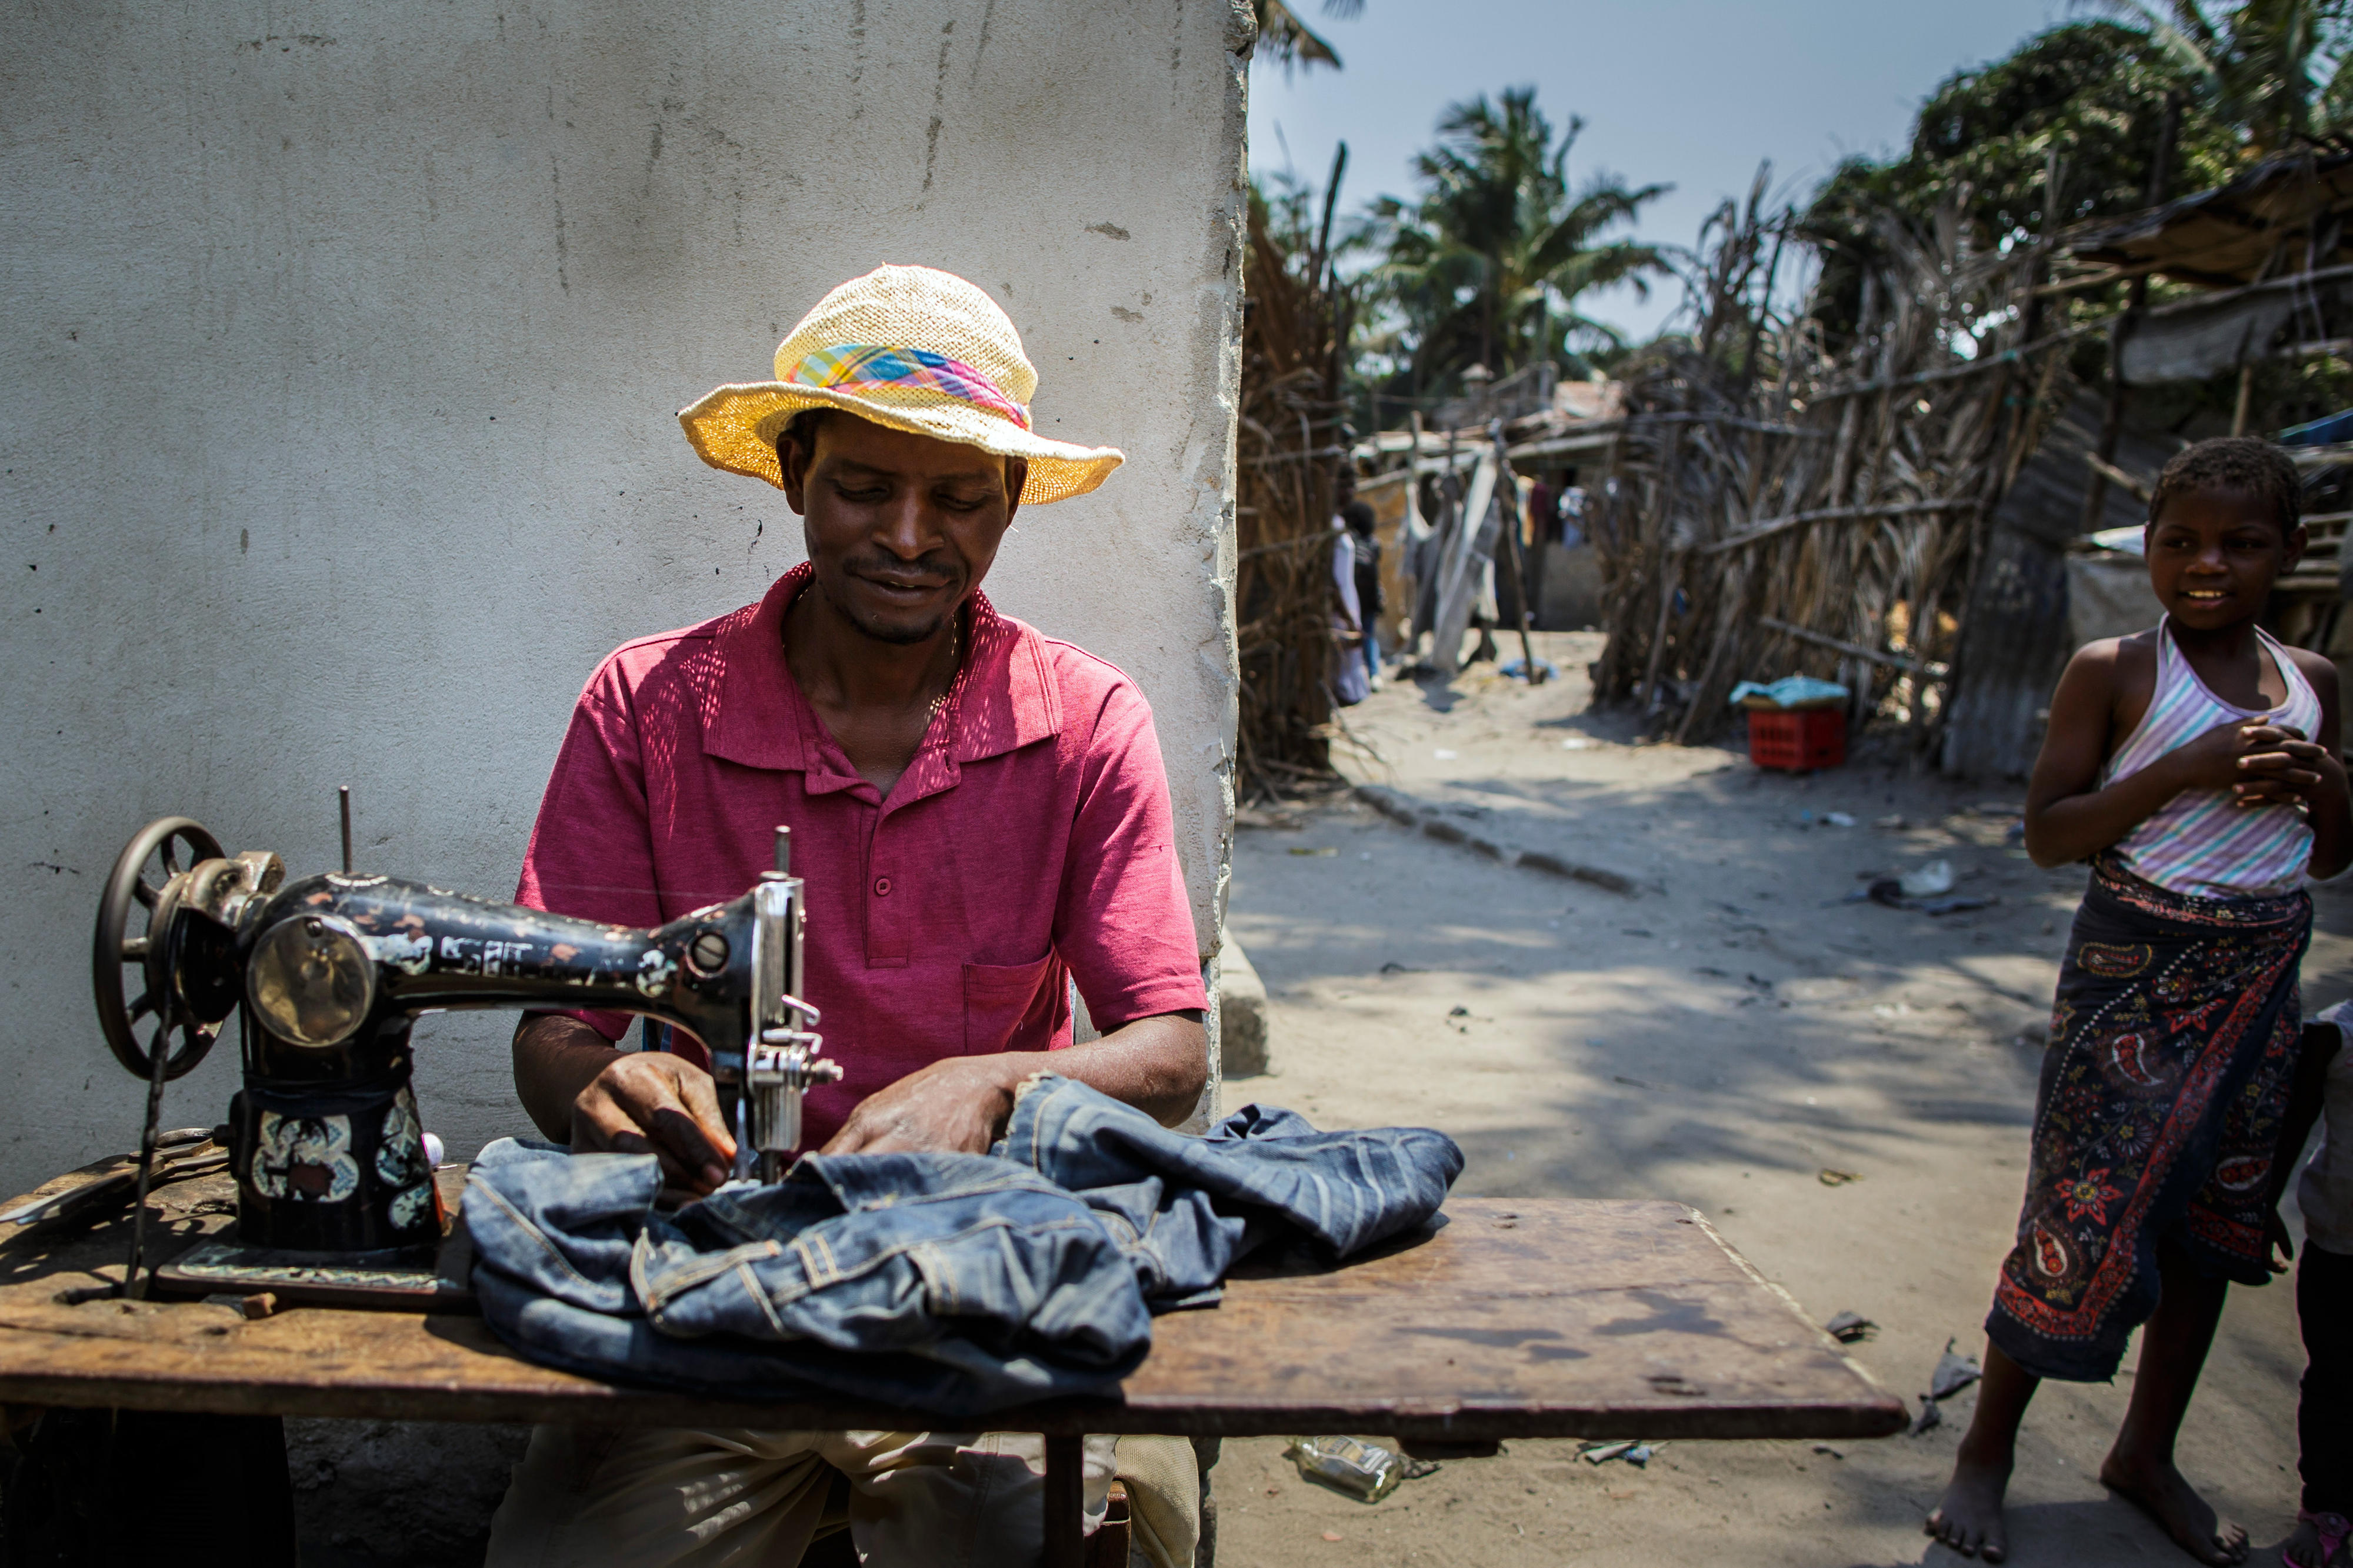 A tailor works in a slum in the Mozambican city of Beira with his sewing machine on the street.